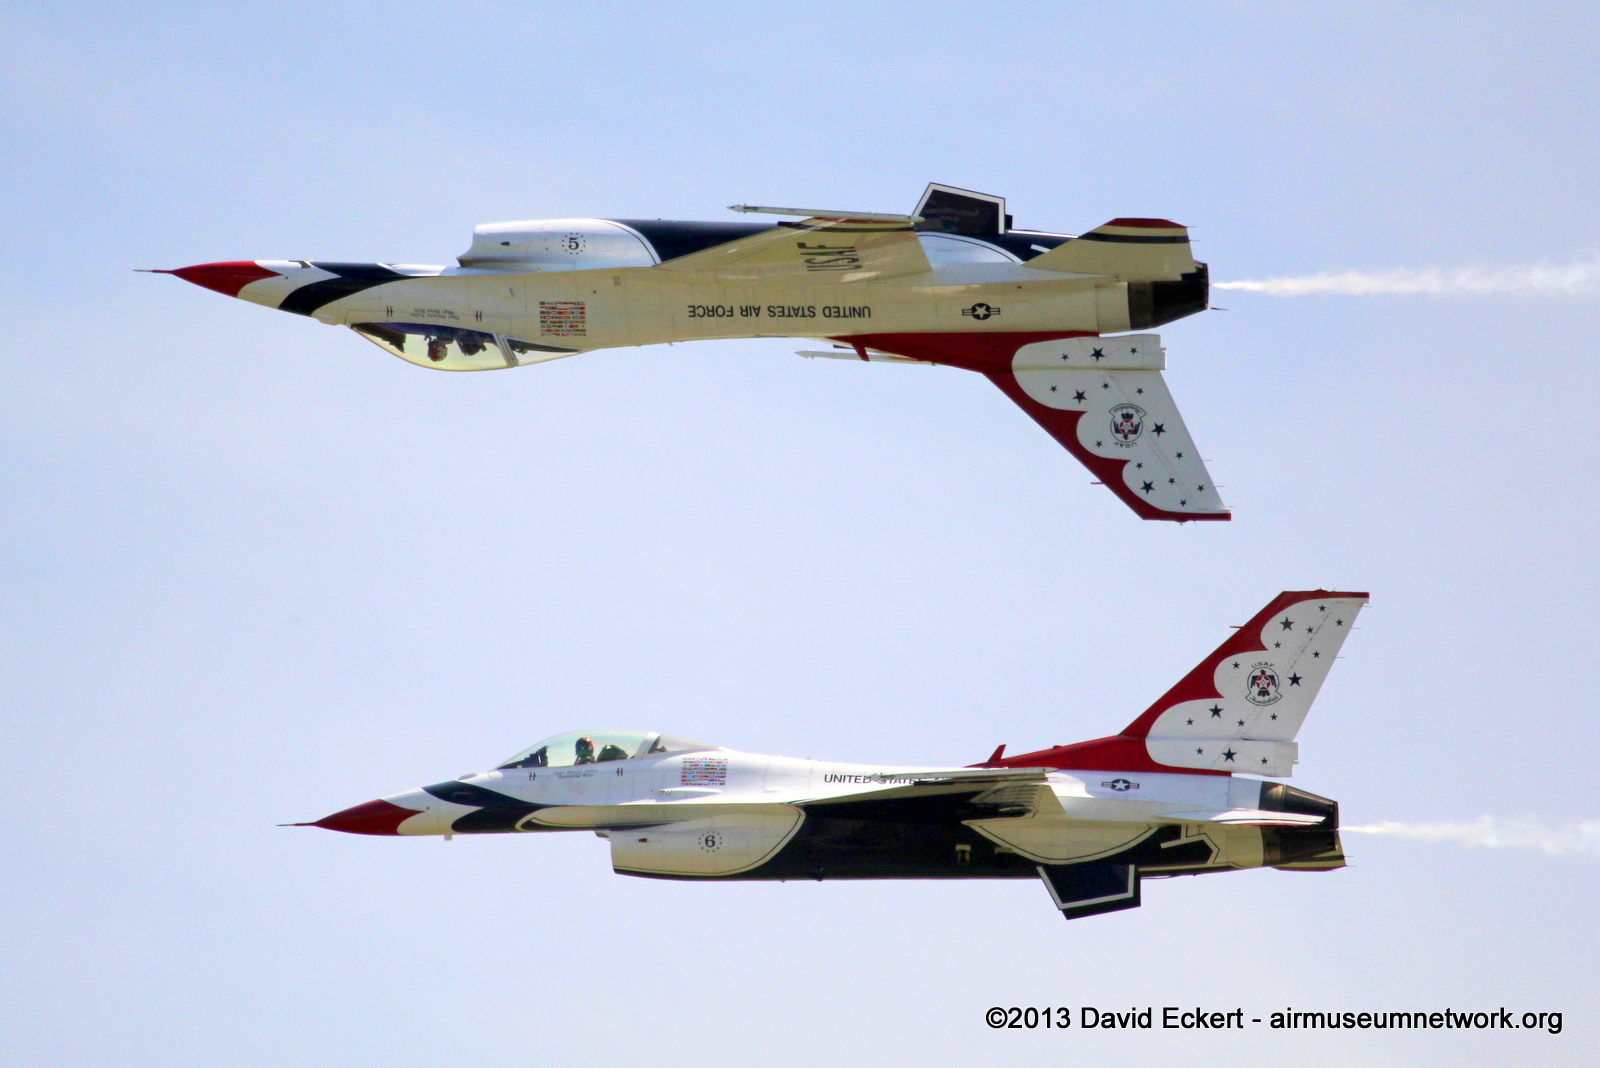 Air Force's Thunderbirds perform at McGuire Air Force Base in 2012. Click to enlarge.